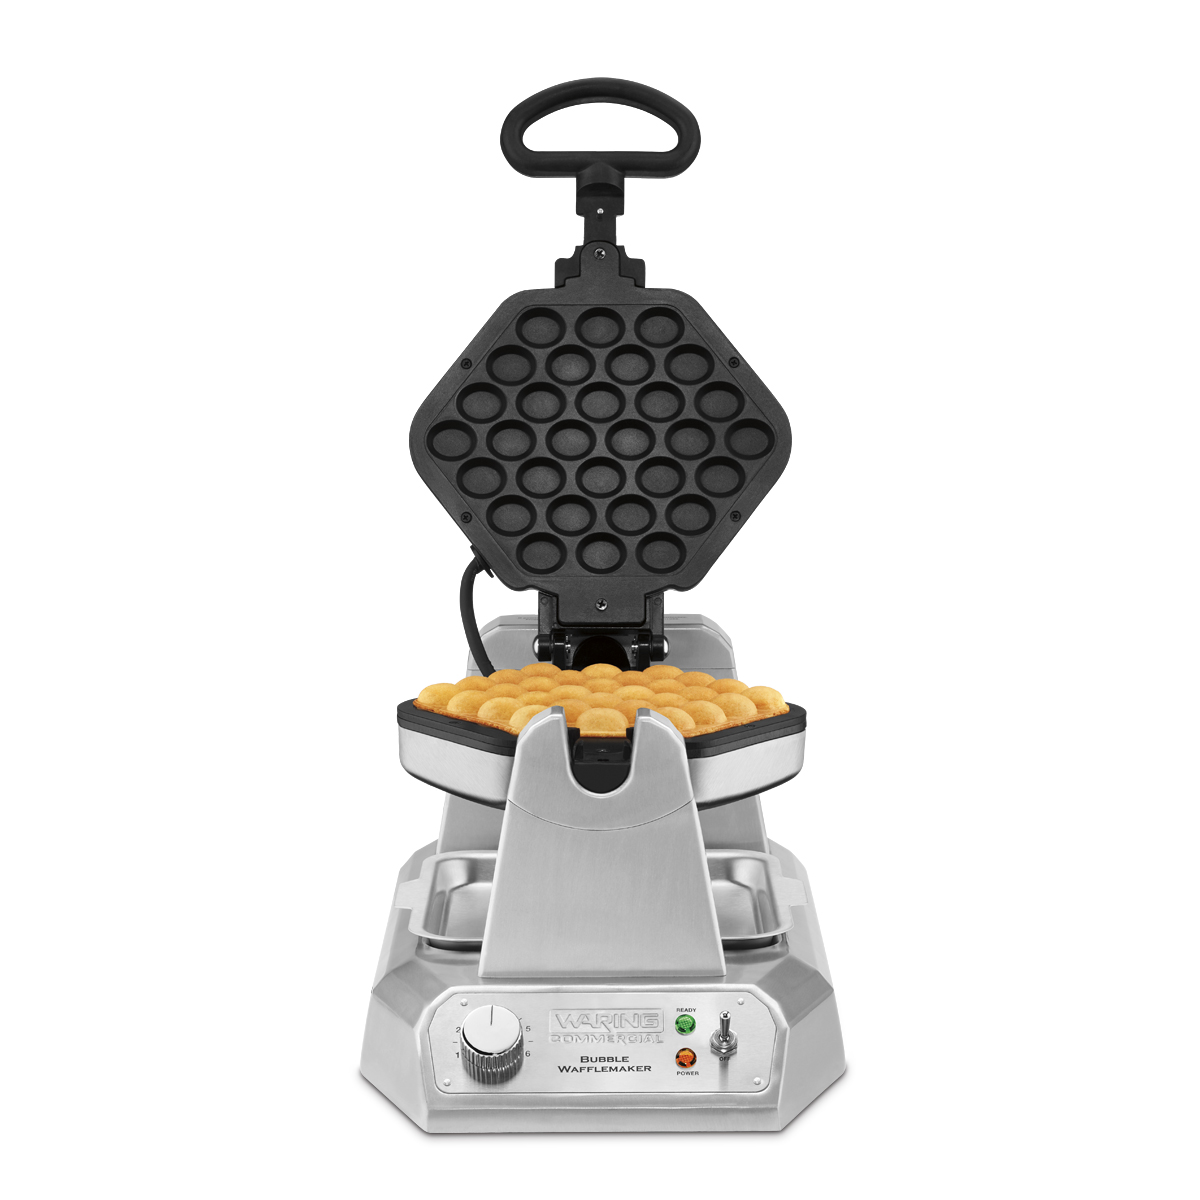 https://www.waringcommercialproducts.com/files/products/wbw300x-waring-bubble-waffle-maker-inset-2.jpg